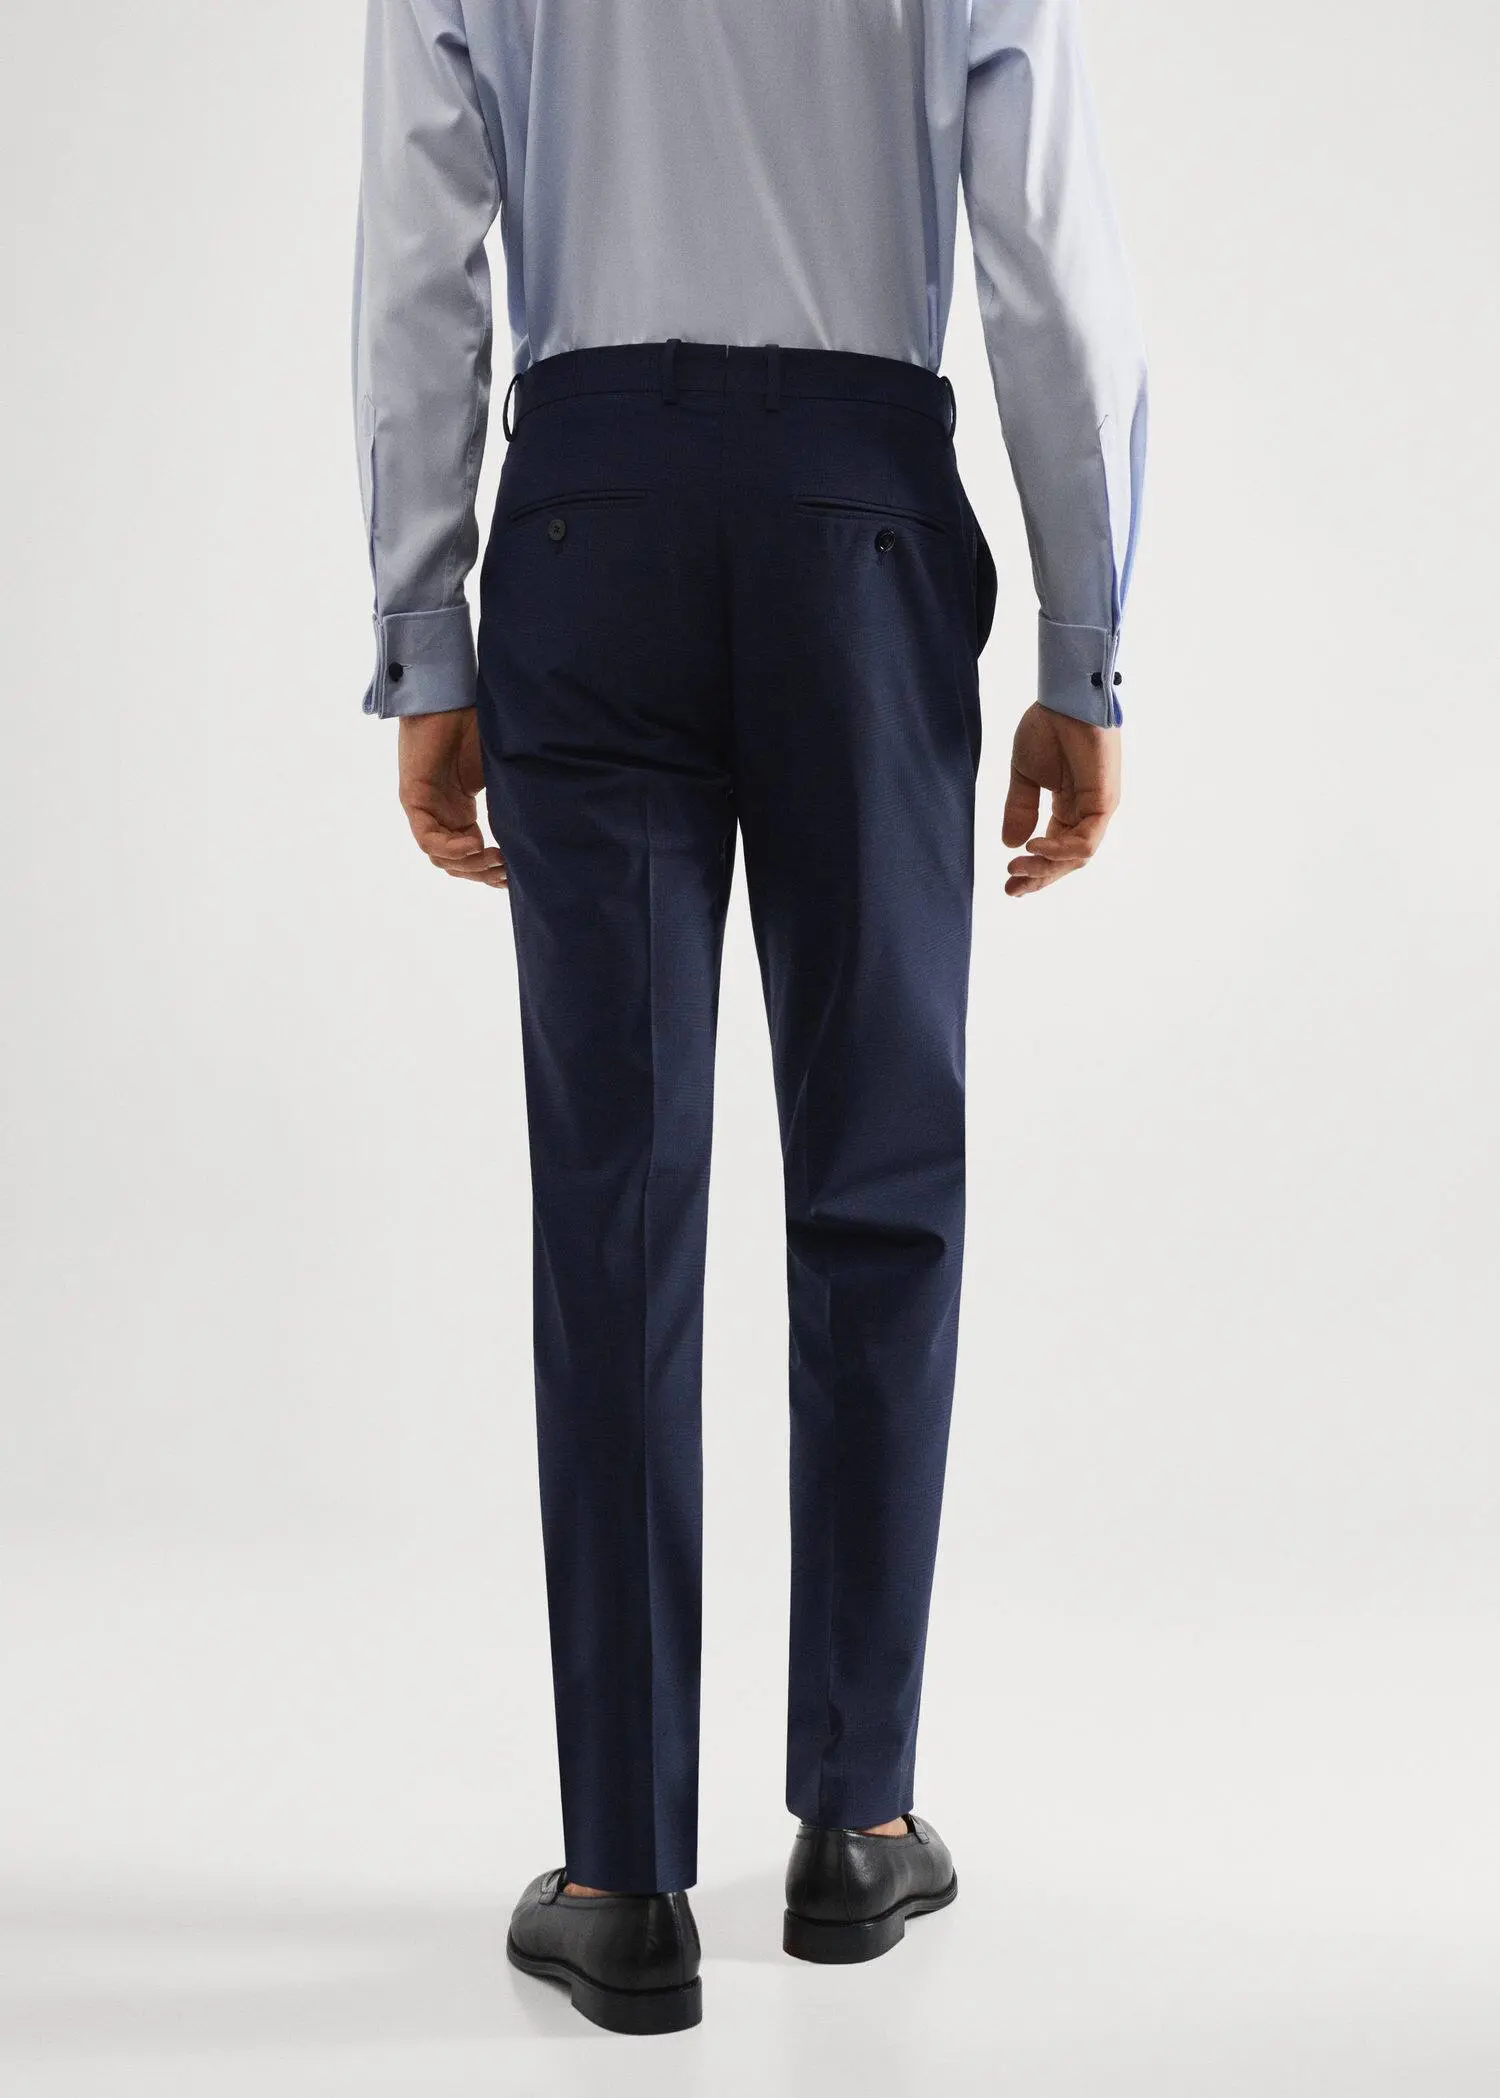 Mango Wool slim-fit check suit pants. a man wearing a suit standing in front of a white wall. 